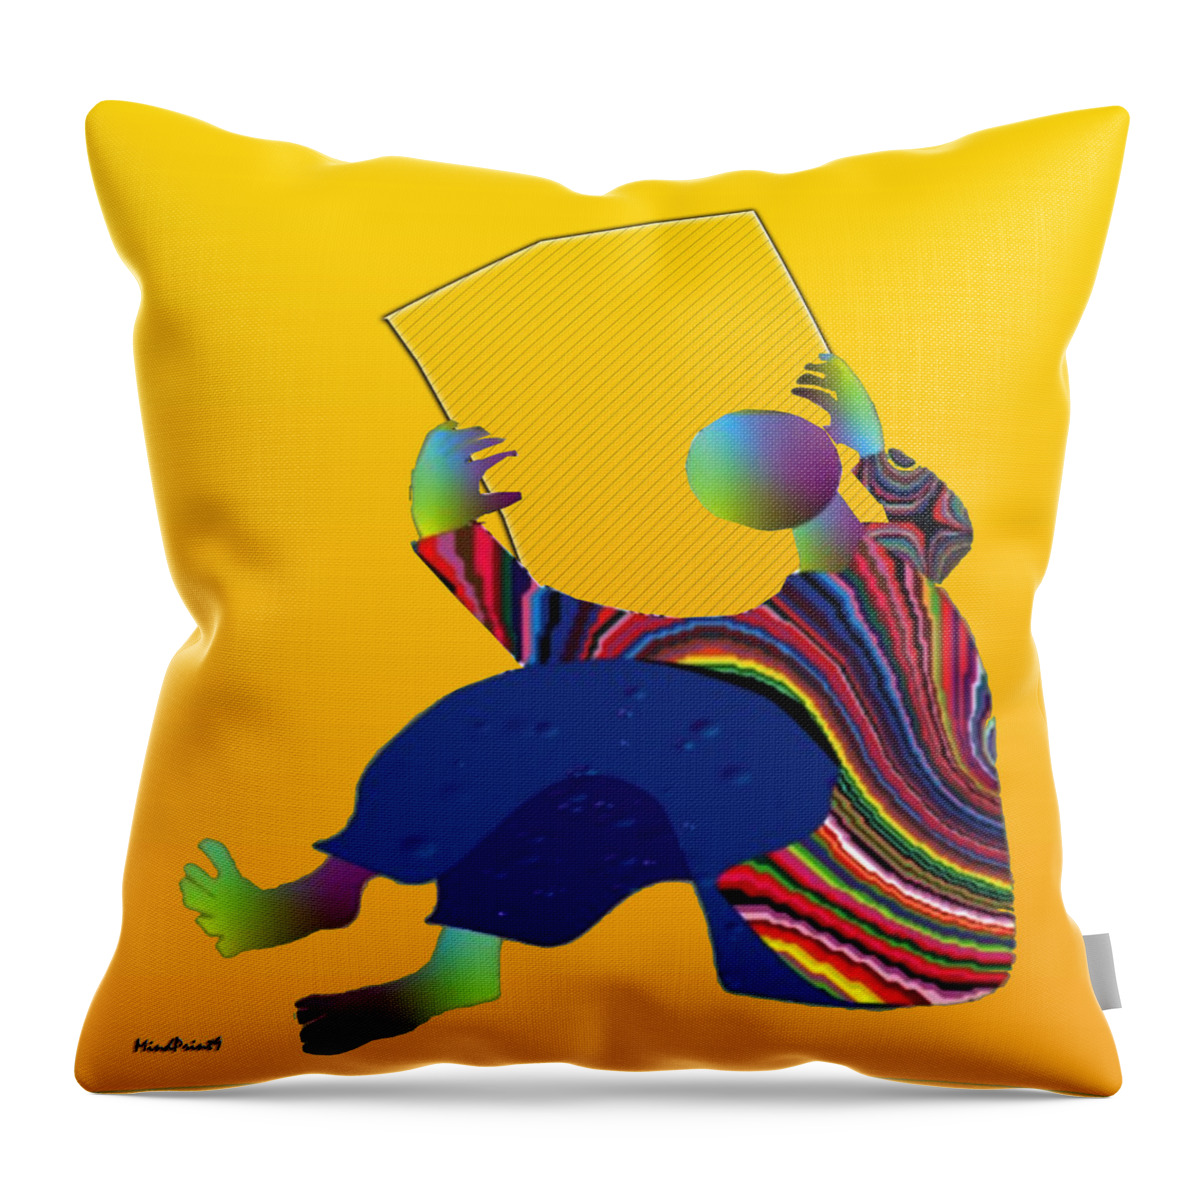 Reading Throw Pillow featuring the digital art Barren Newspaper by Asok Mukhopadhyay